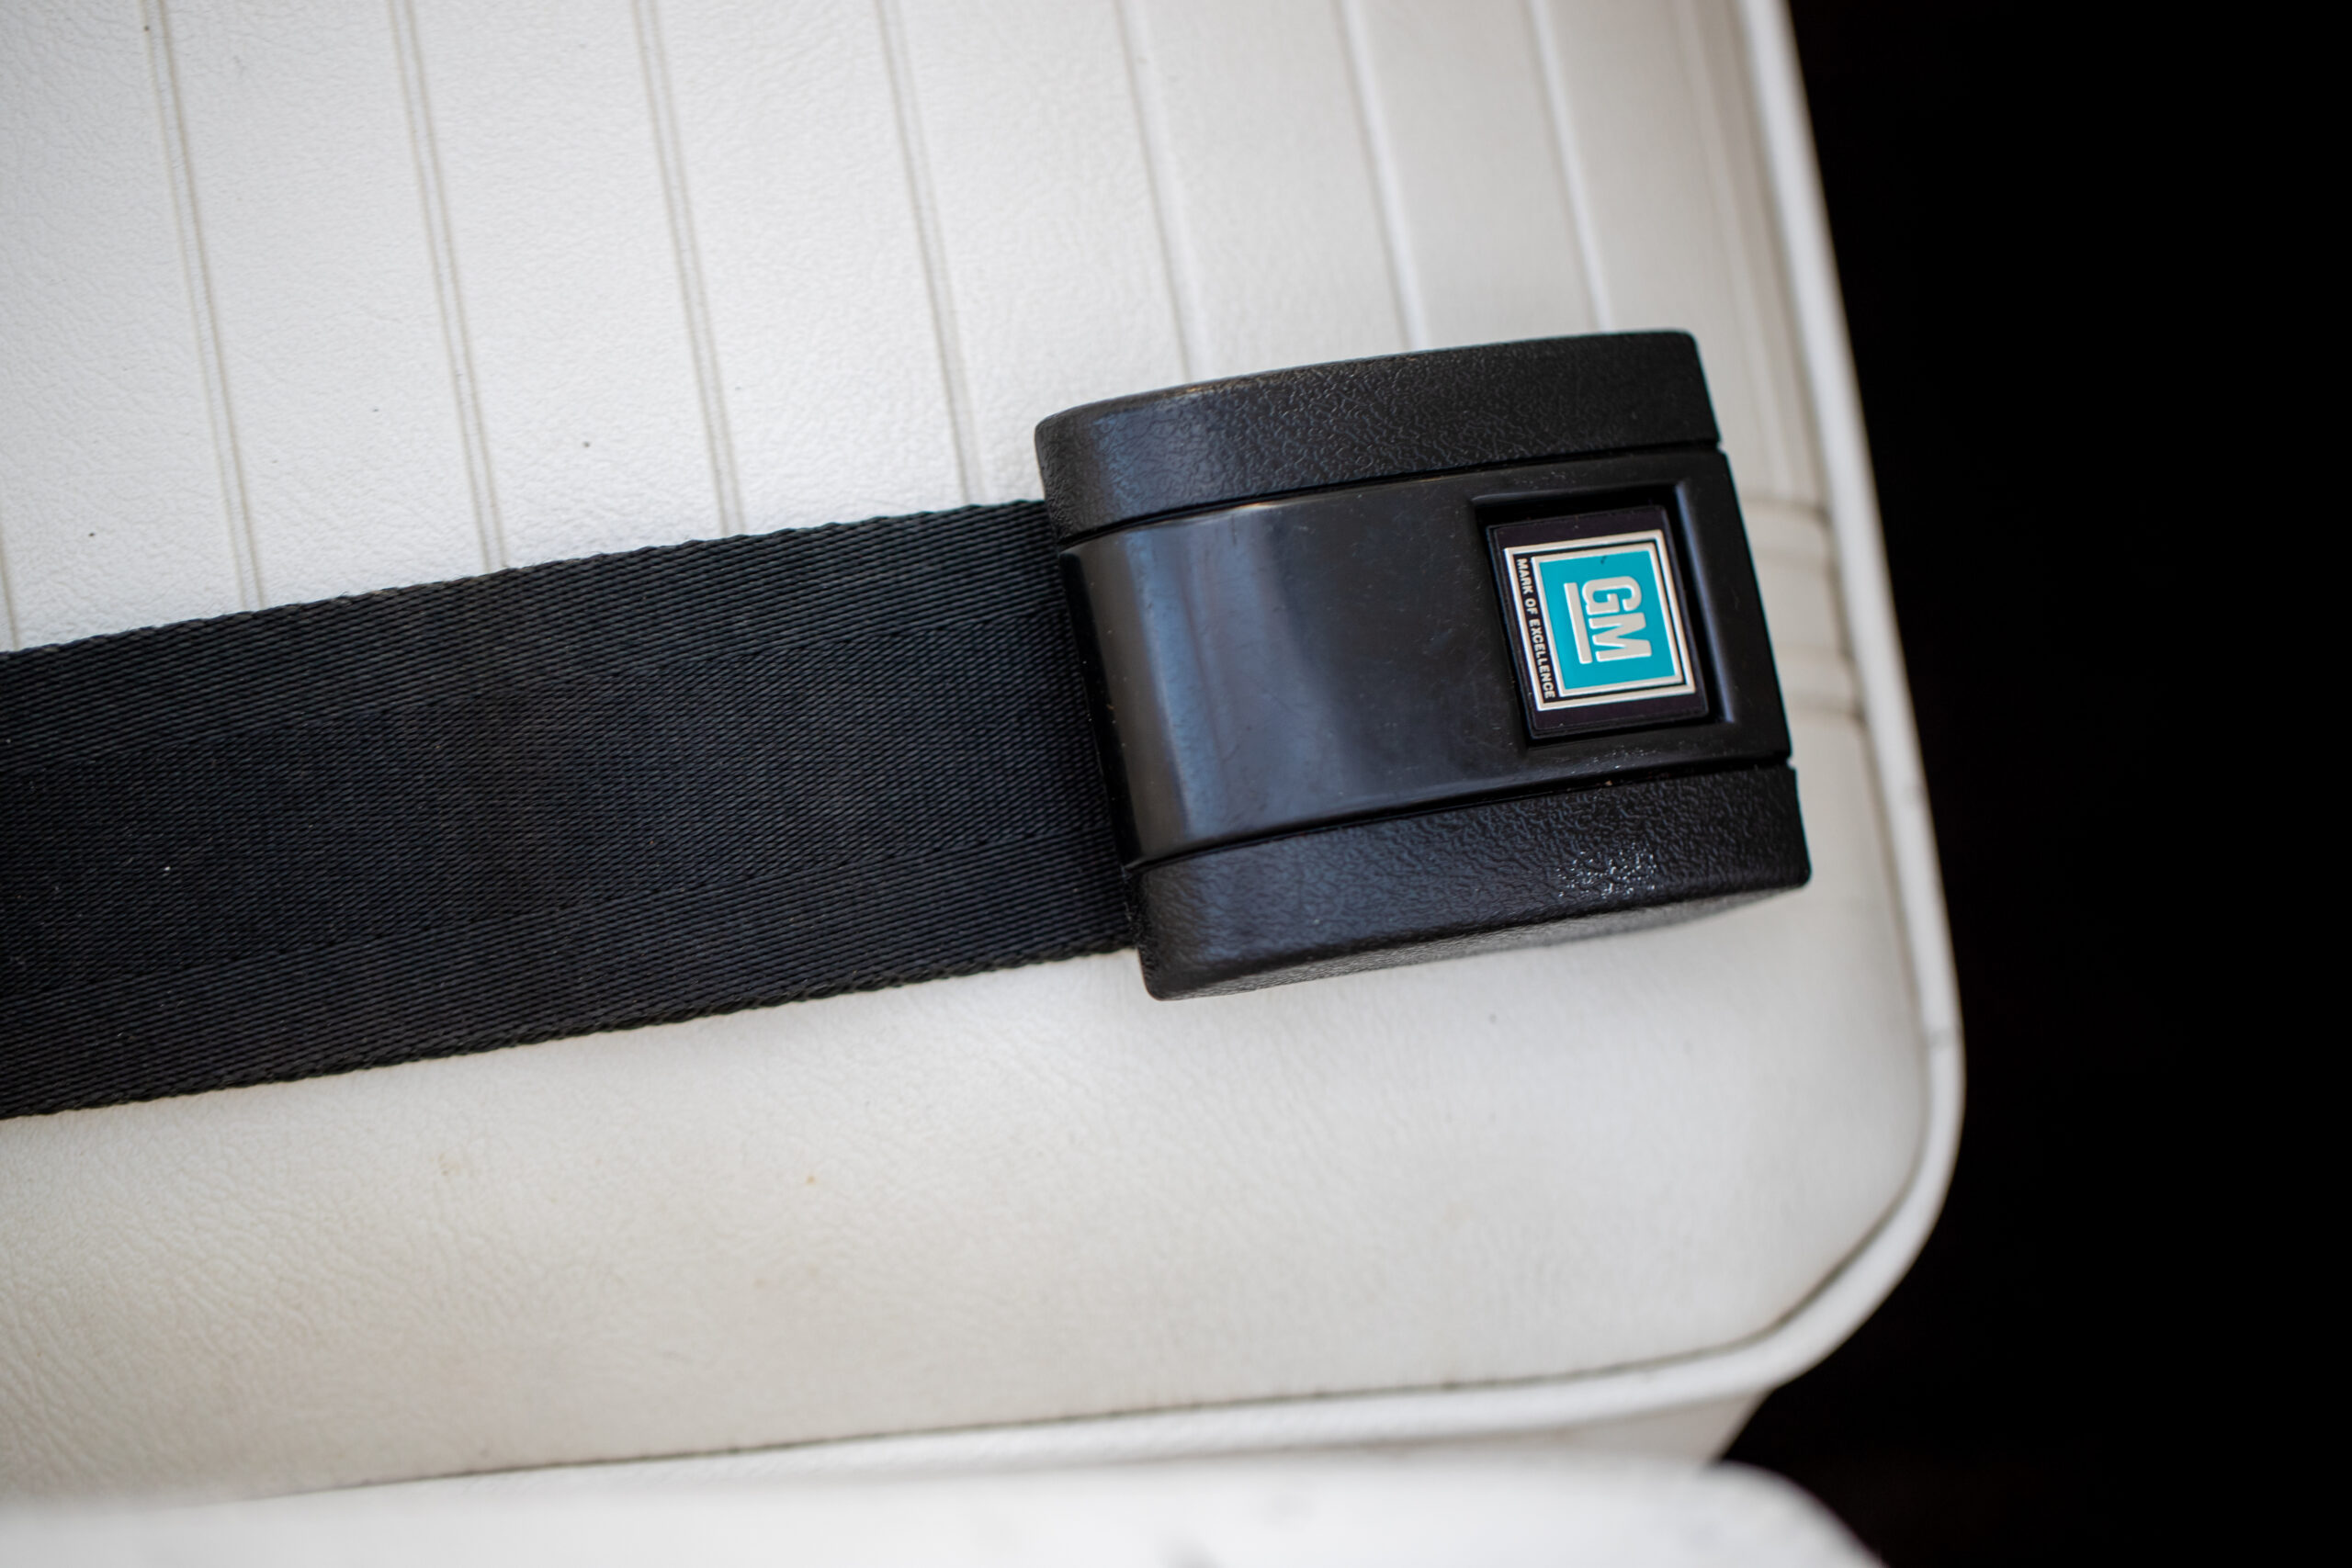 Close-up of a black seatbelt buckle with a GM logo, fastened on a white padded car seat.